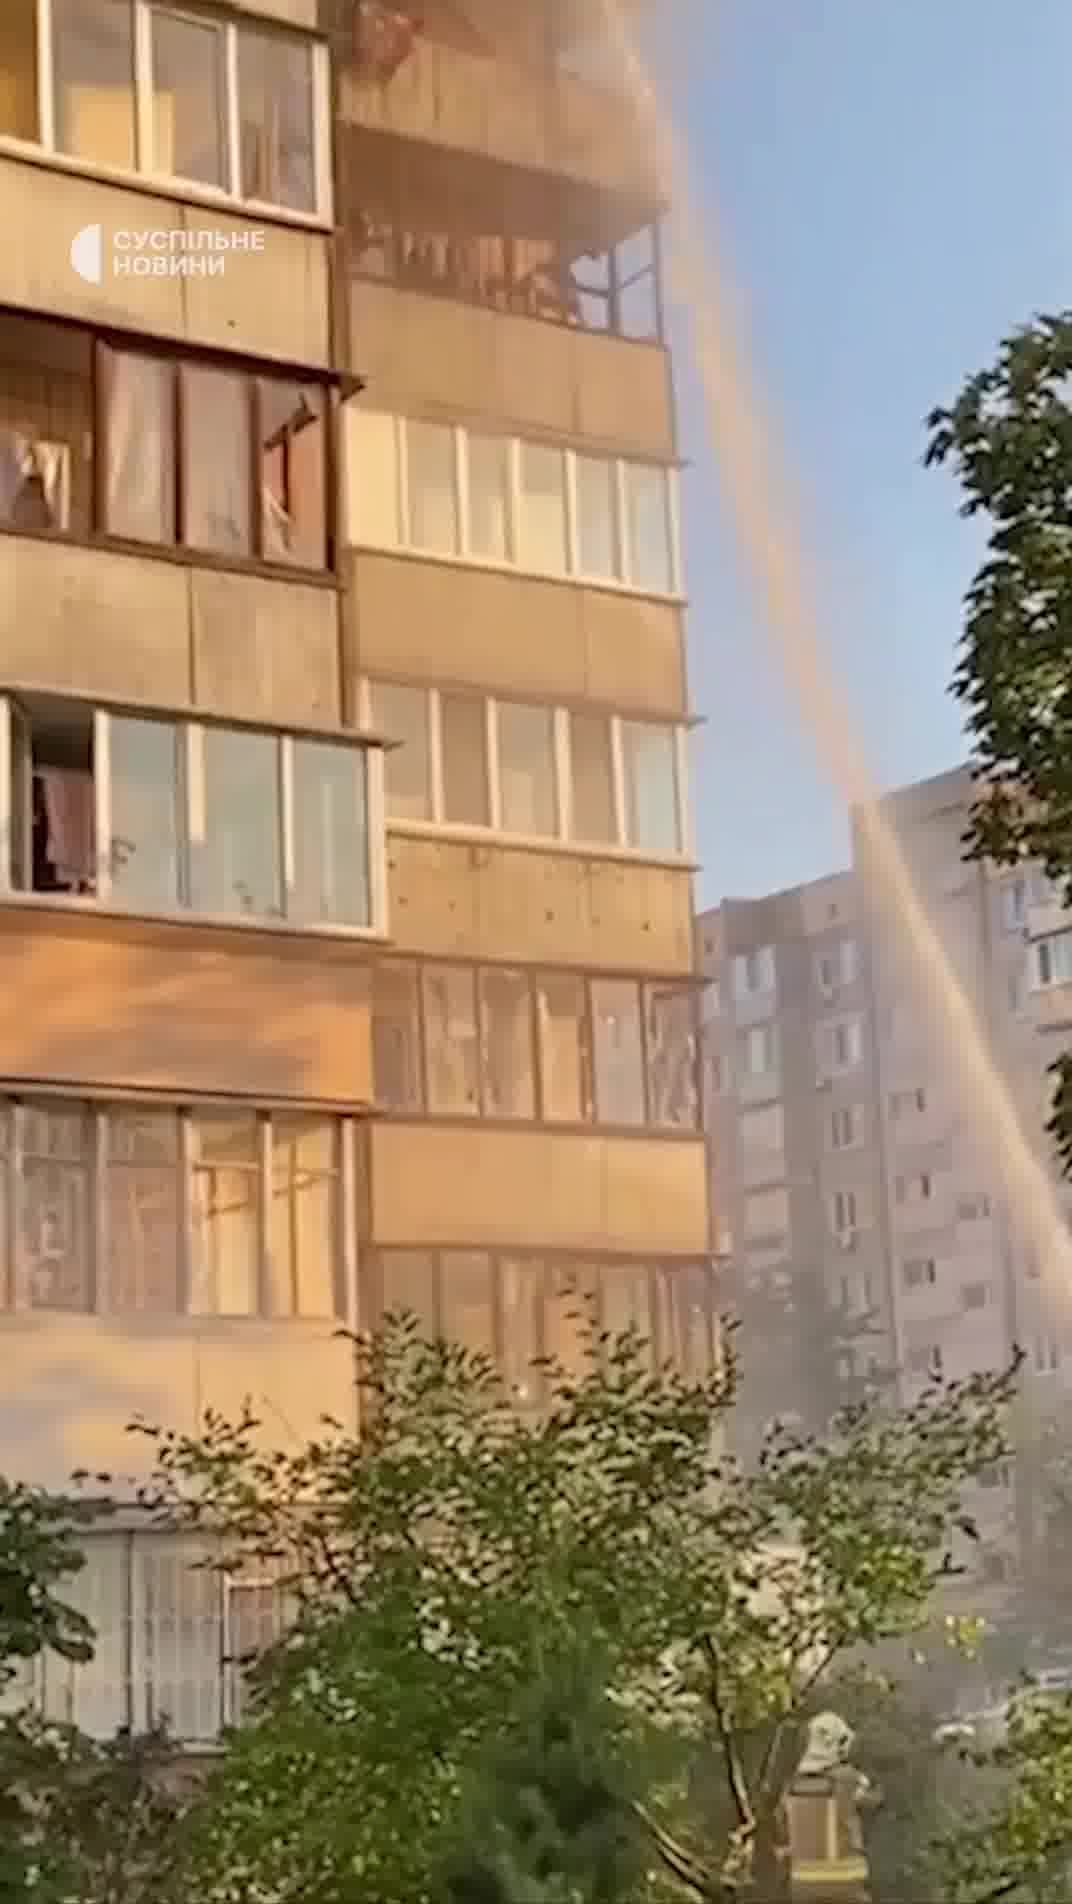 Residential building damaged as result of Russian missile strike at Obolonsky district of Kyiv